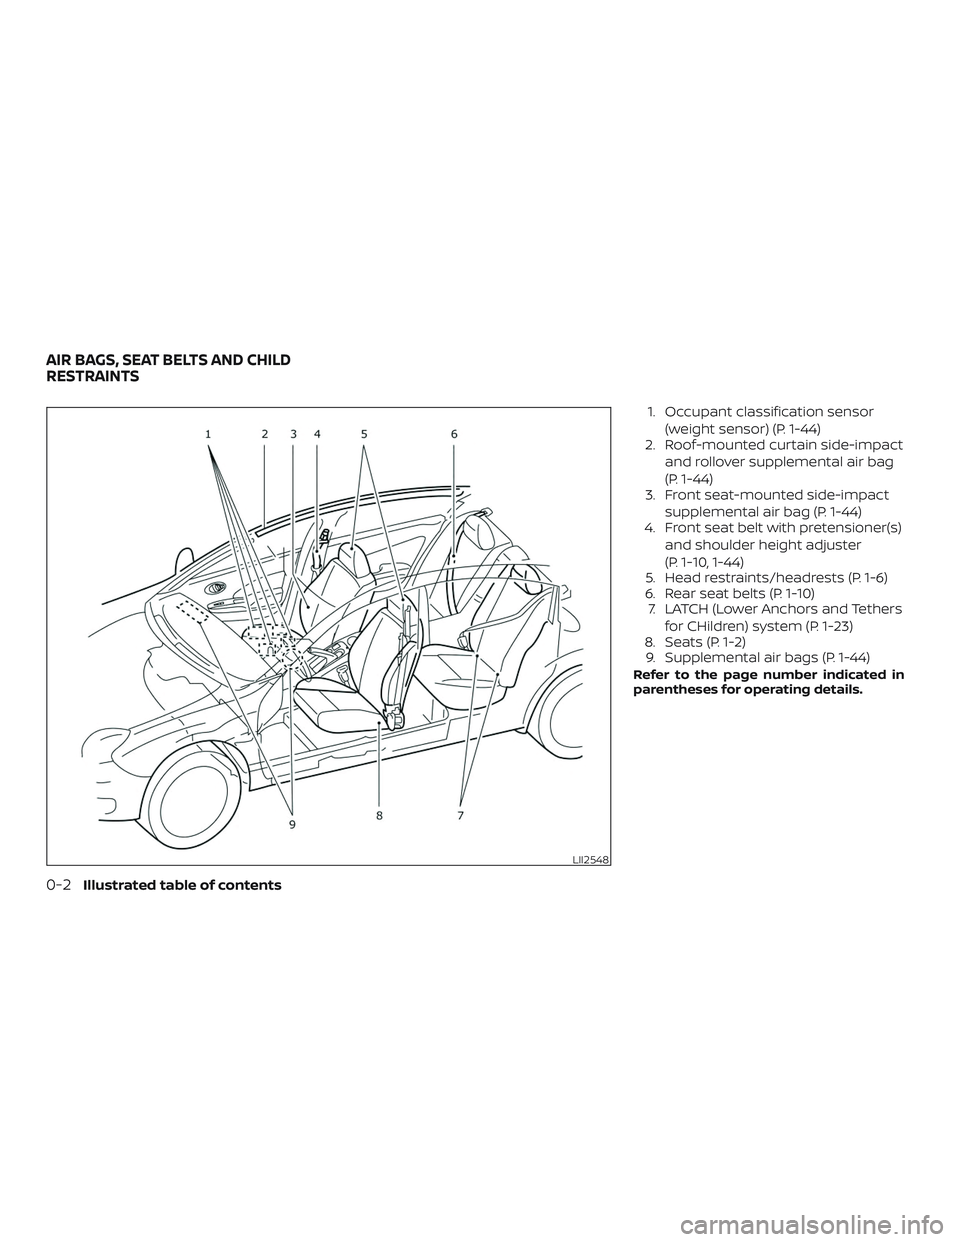 NISSAN MICRA 2019  Owner´s Manual 1. Occupant classification sensor(weight sensor) (P. 1-44)
2. Roof-mounted curtain side-impact
and rollover supplemental air bag
(P. 1-44)
3. Front seat-mounted side-impact
supplemental air bag (P. 1-